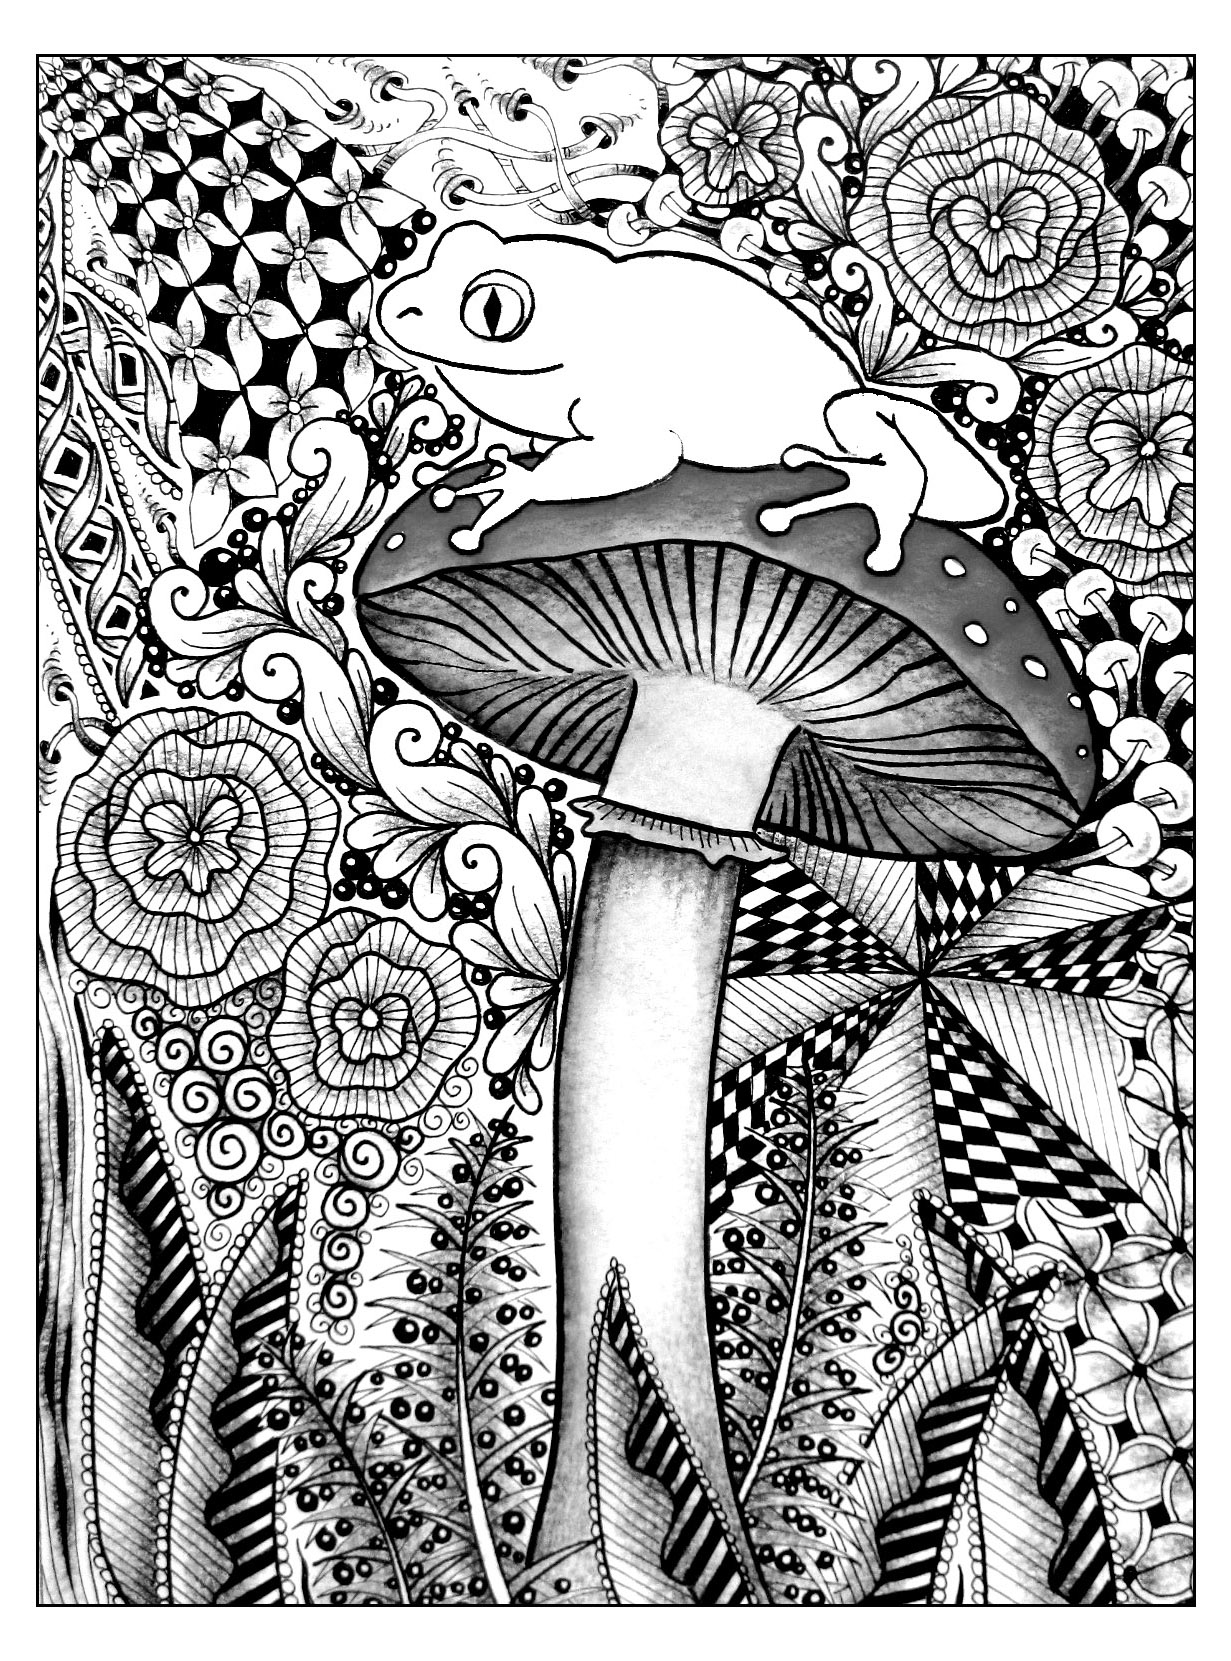 Frog on a mushroom - Flowers Adult Coloring Pages